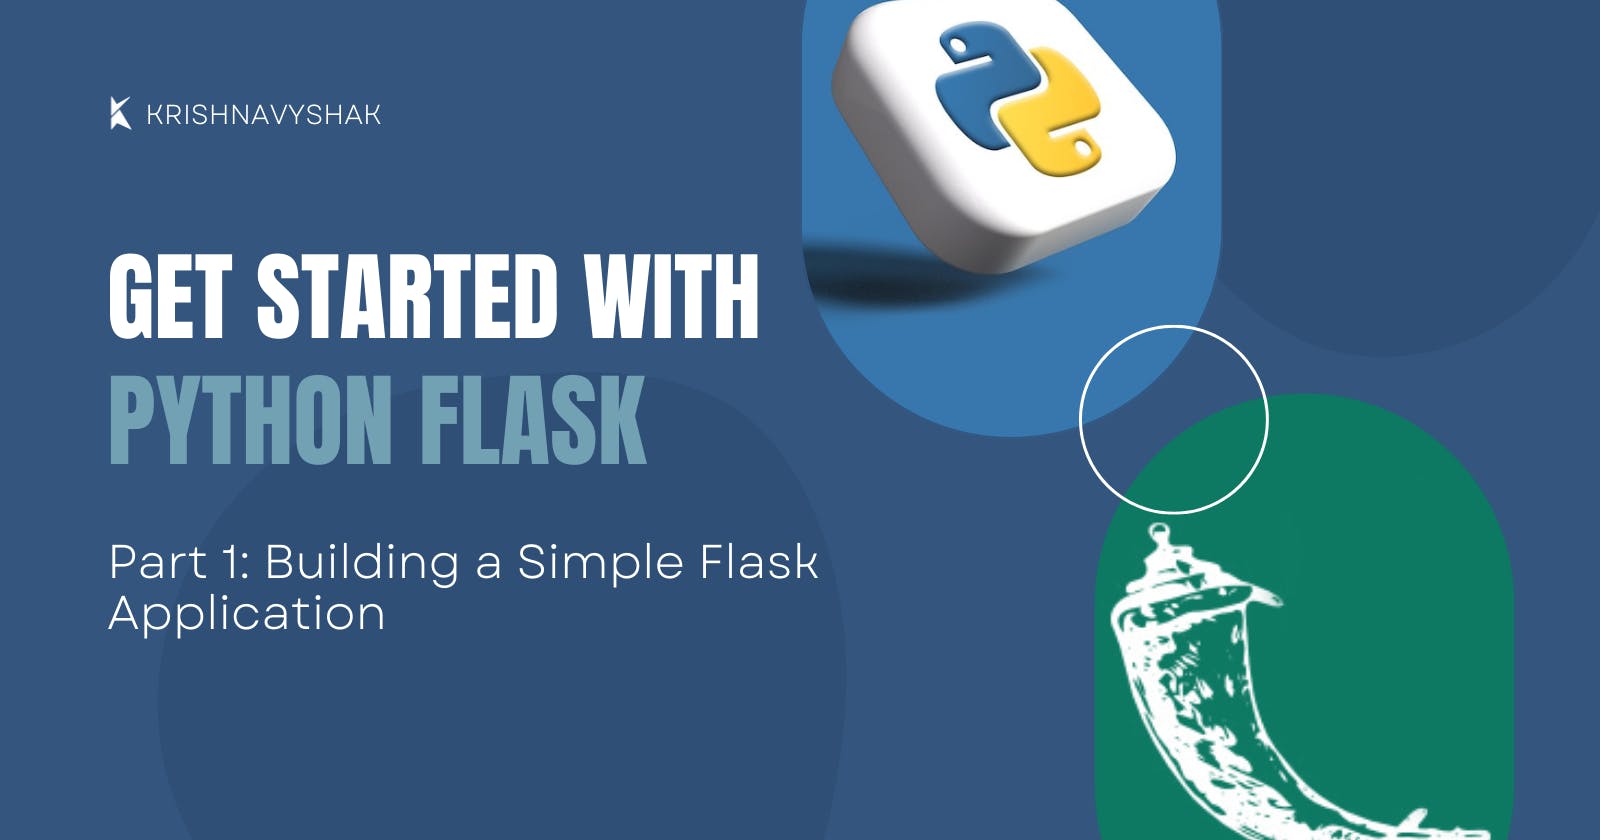 Building a Simple Flask Application